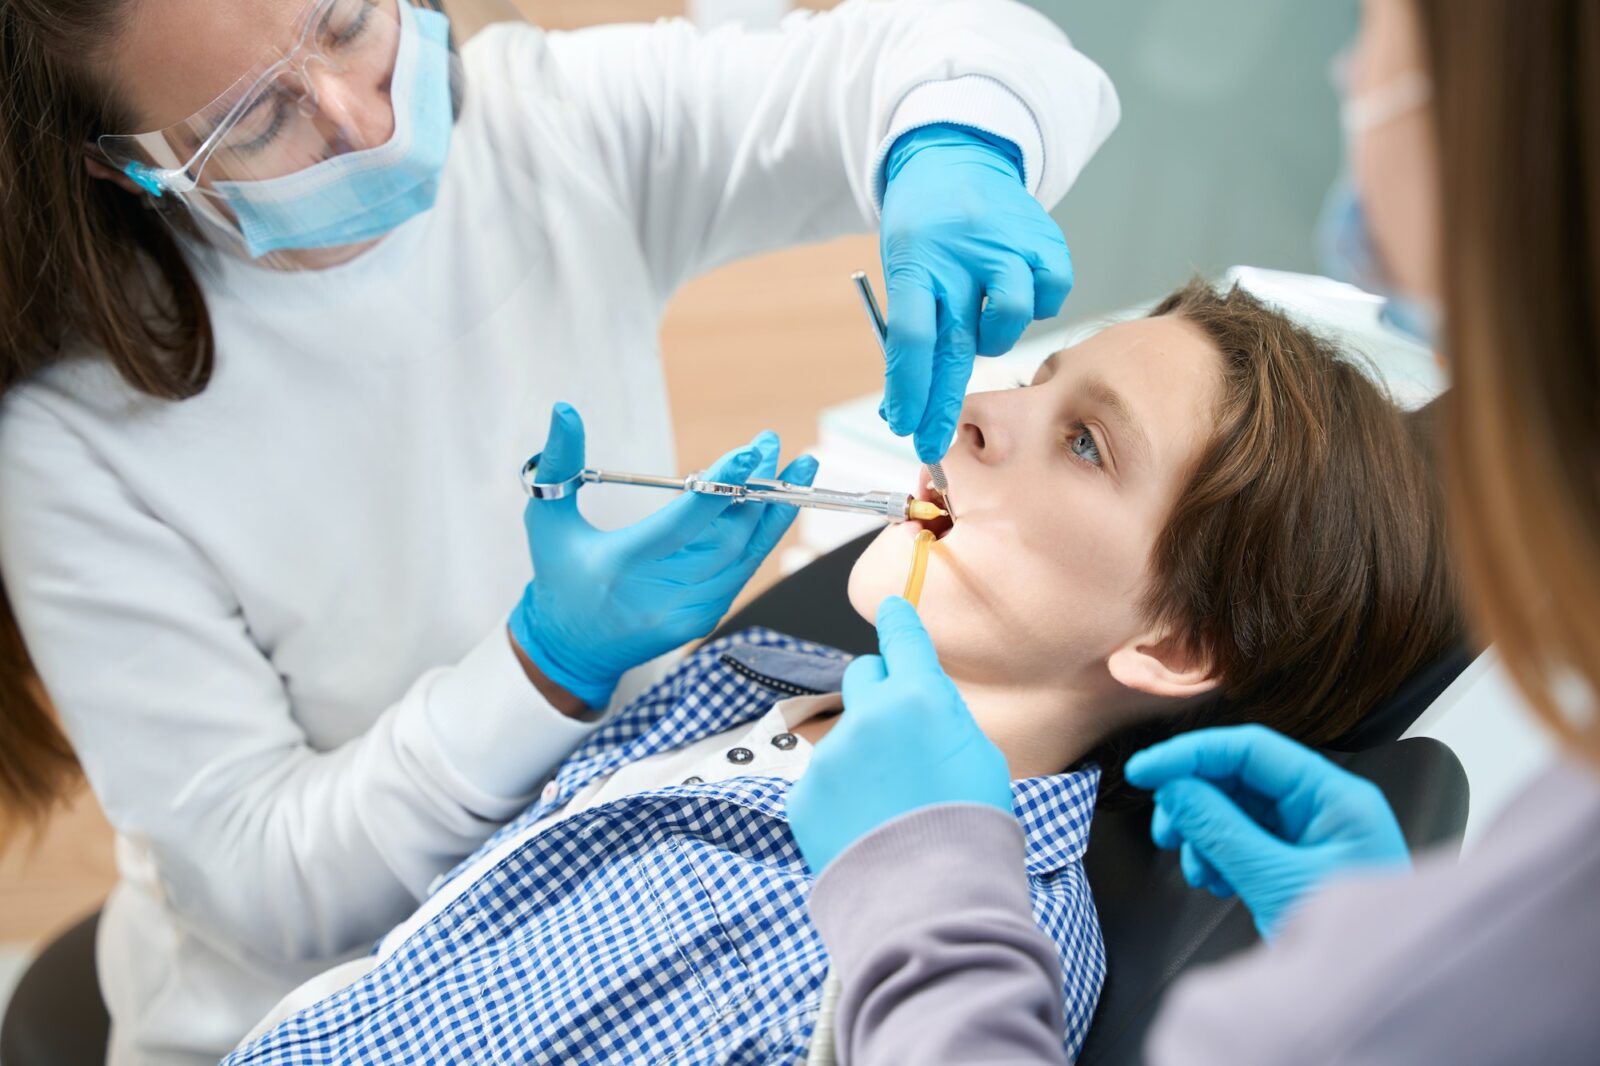 Child is given an injection of anesthesia before tooth extraction